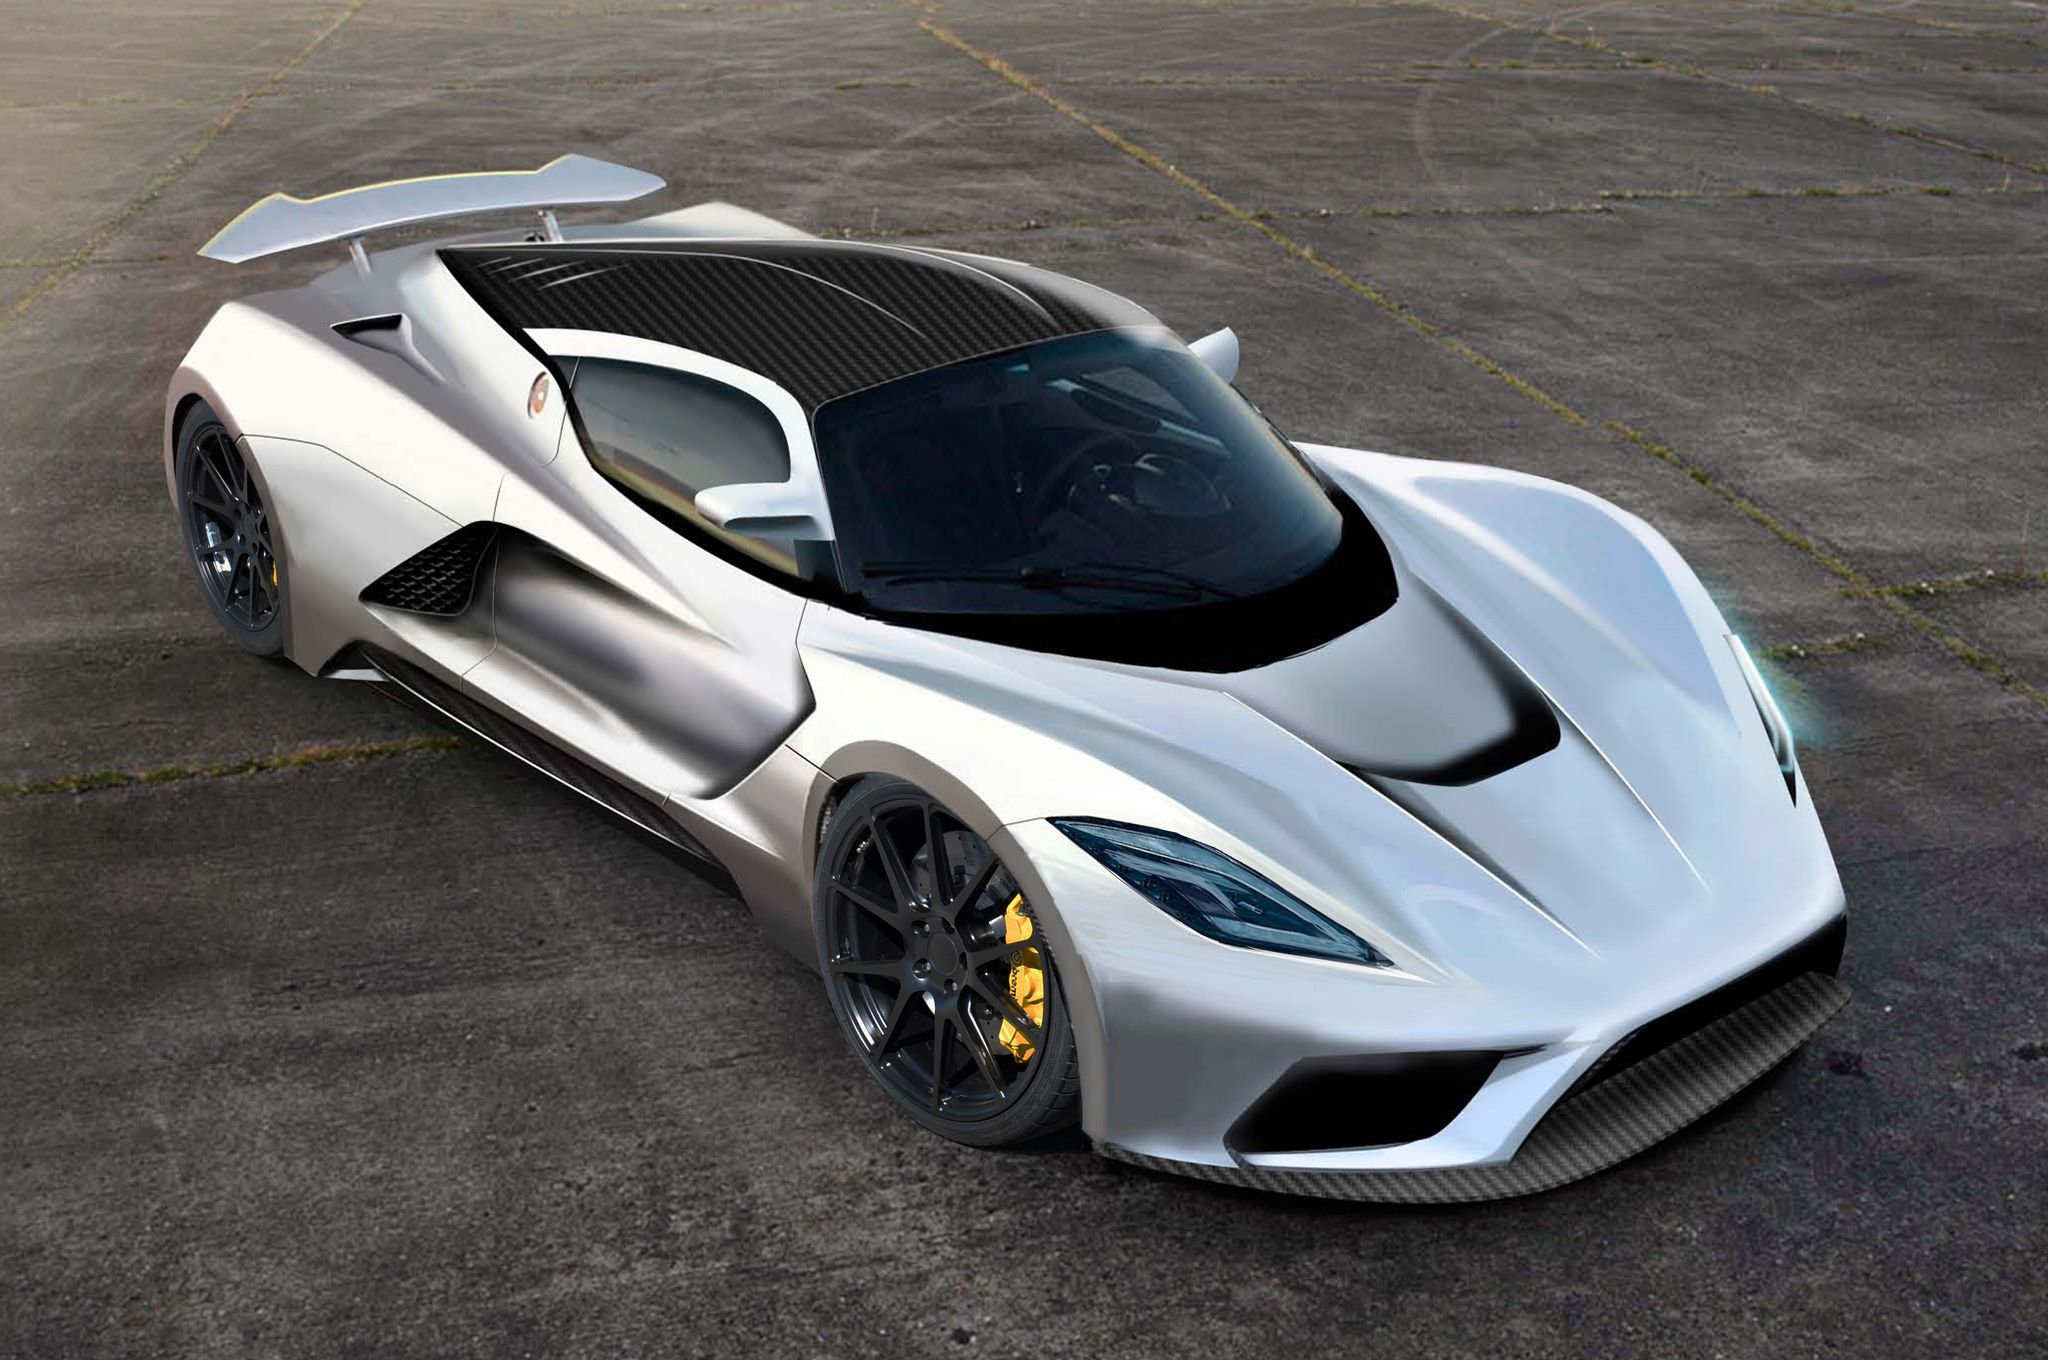 Hennessey Venom F5 1280x1024 Resolution HD 4k Wallpaper, Image, Background, Photo and Picture